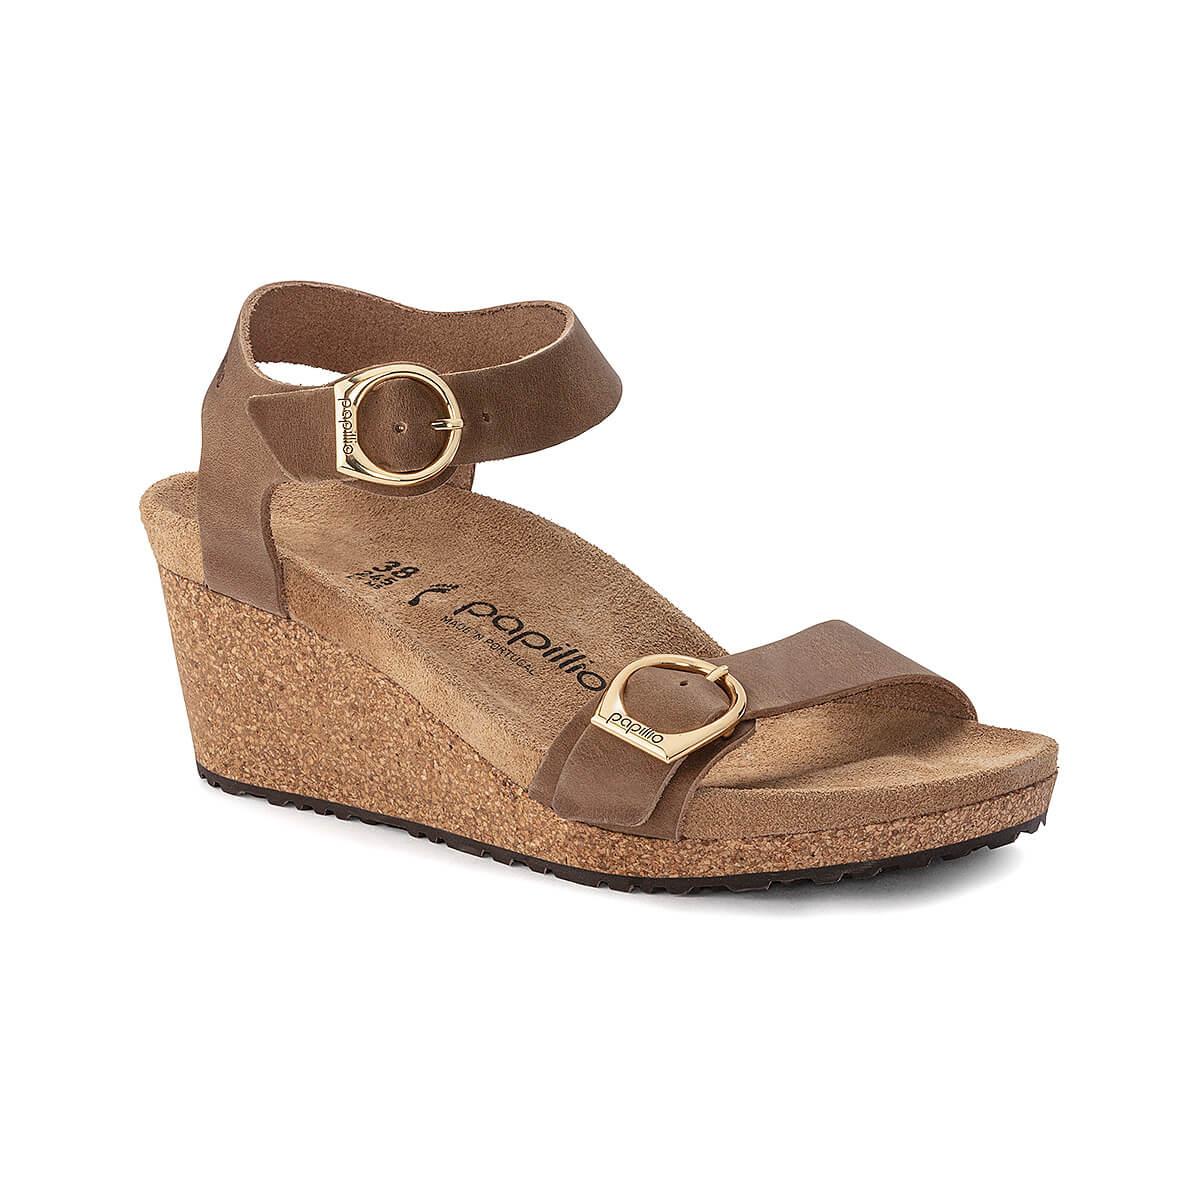  Women's Soley Limited Ring Buckle Wedge Sandals